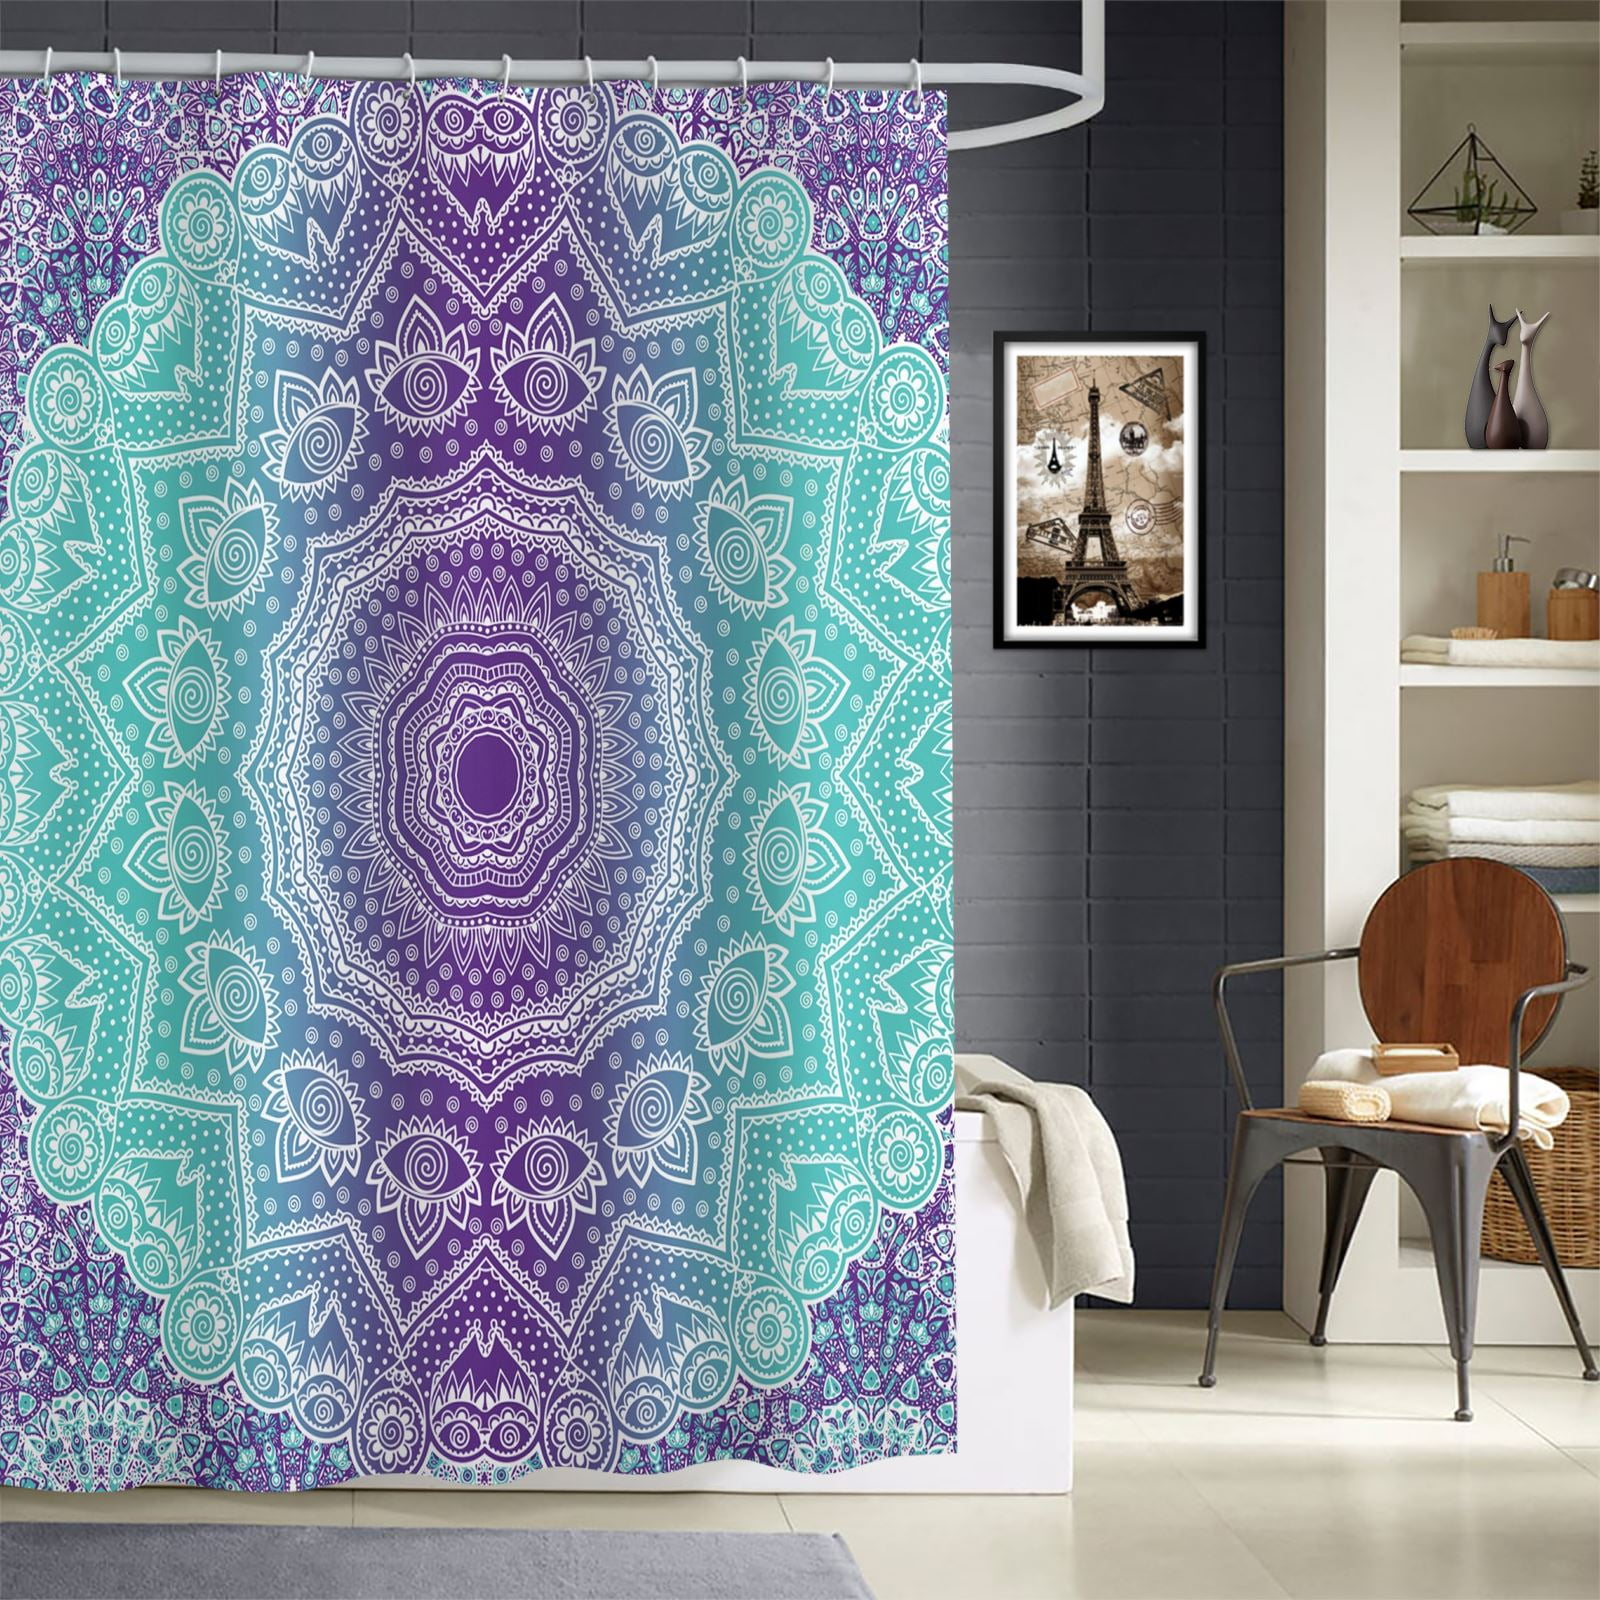 JOOCAR Purple and Turquoise Shower Curtain for Bathroom Decoration